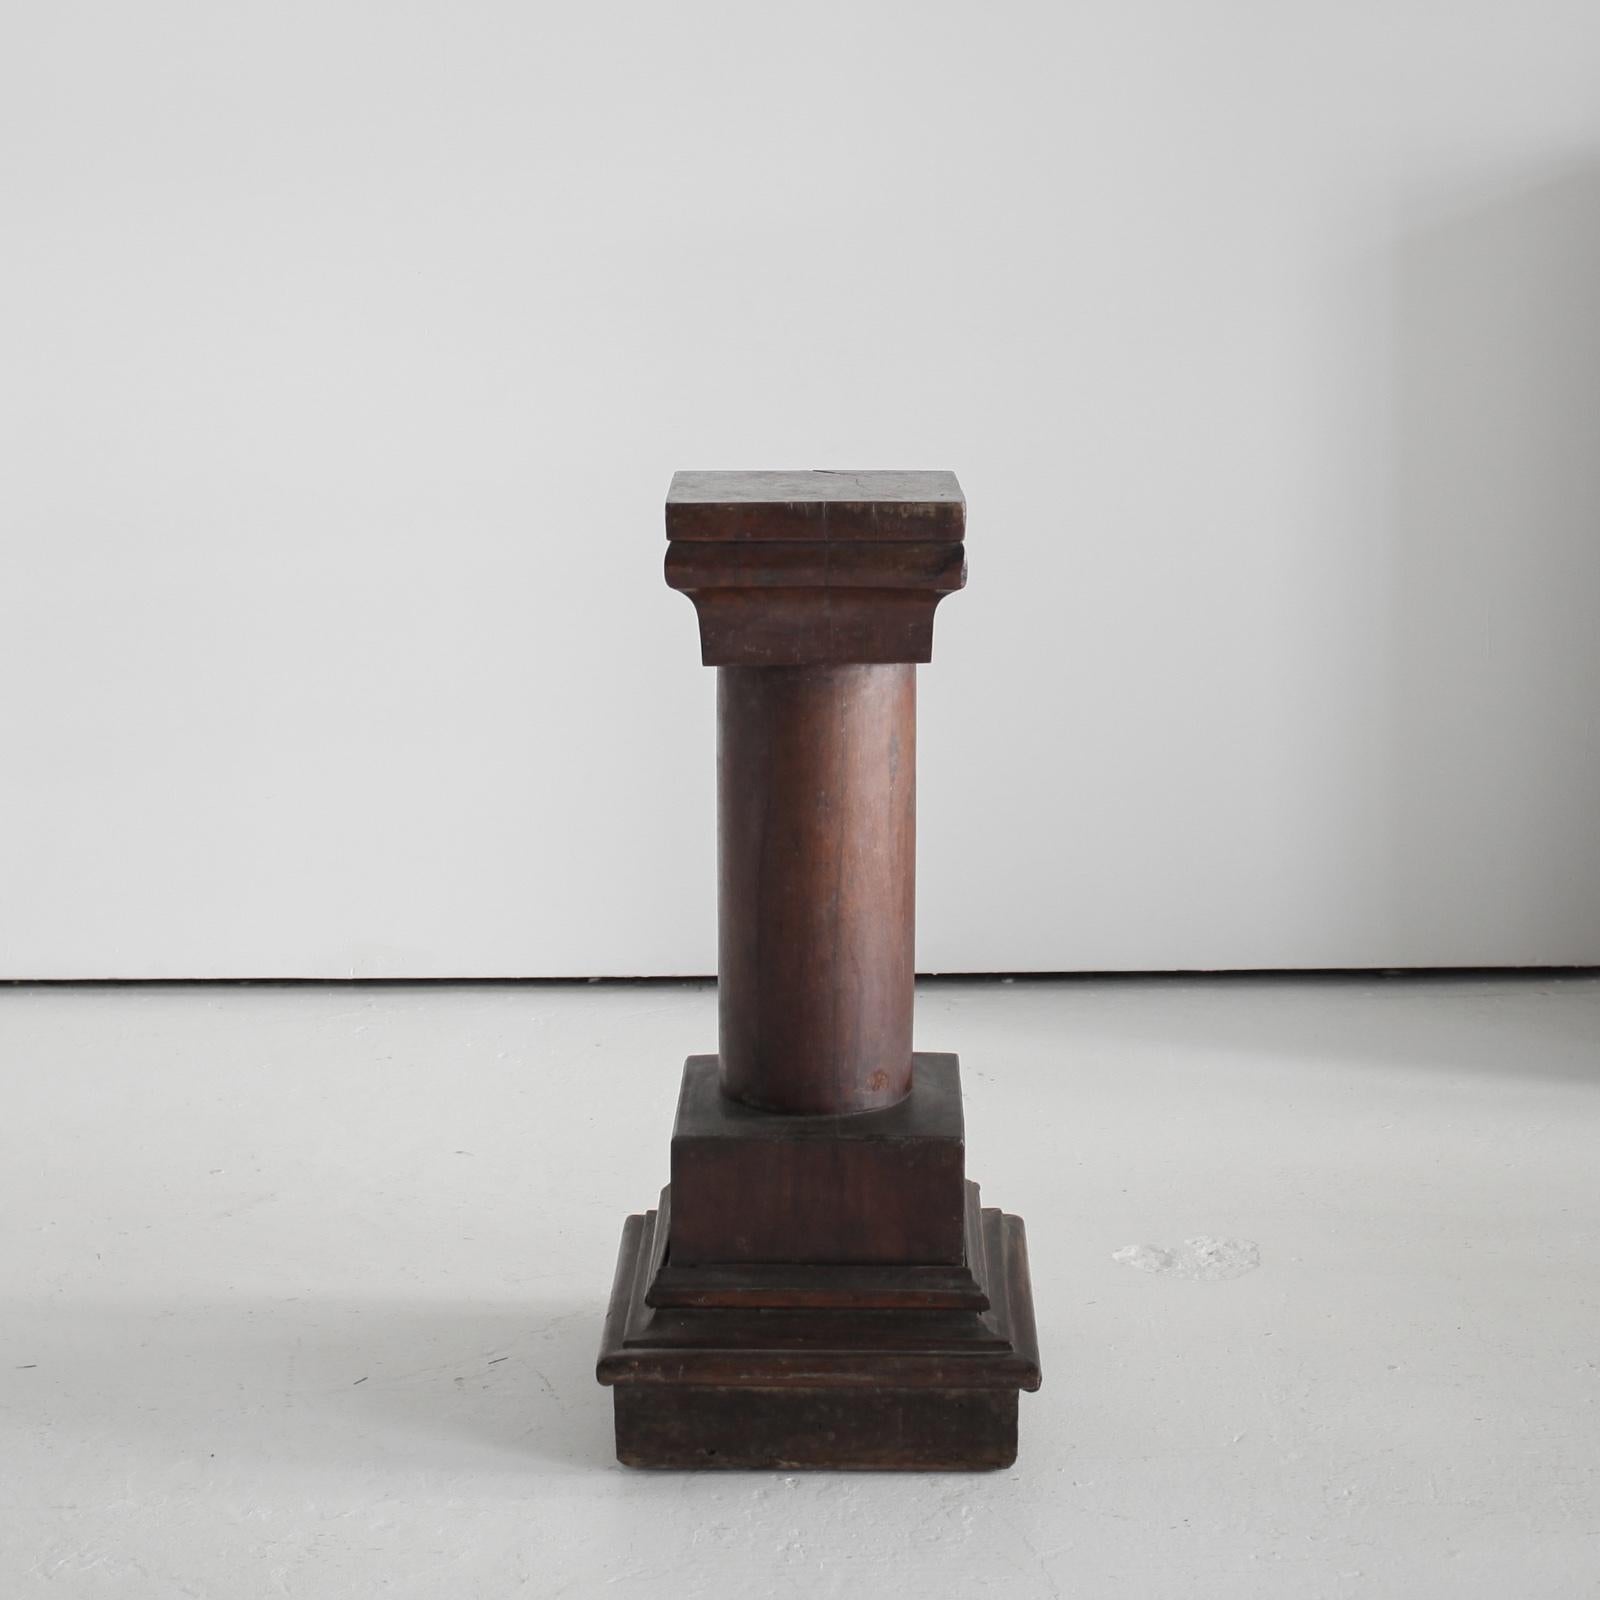 Mahogany Monumental Early 19Th C. Primitive Northern Portuguese Plinth For Sale